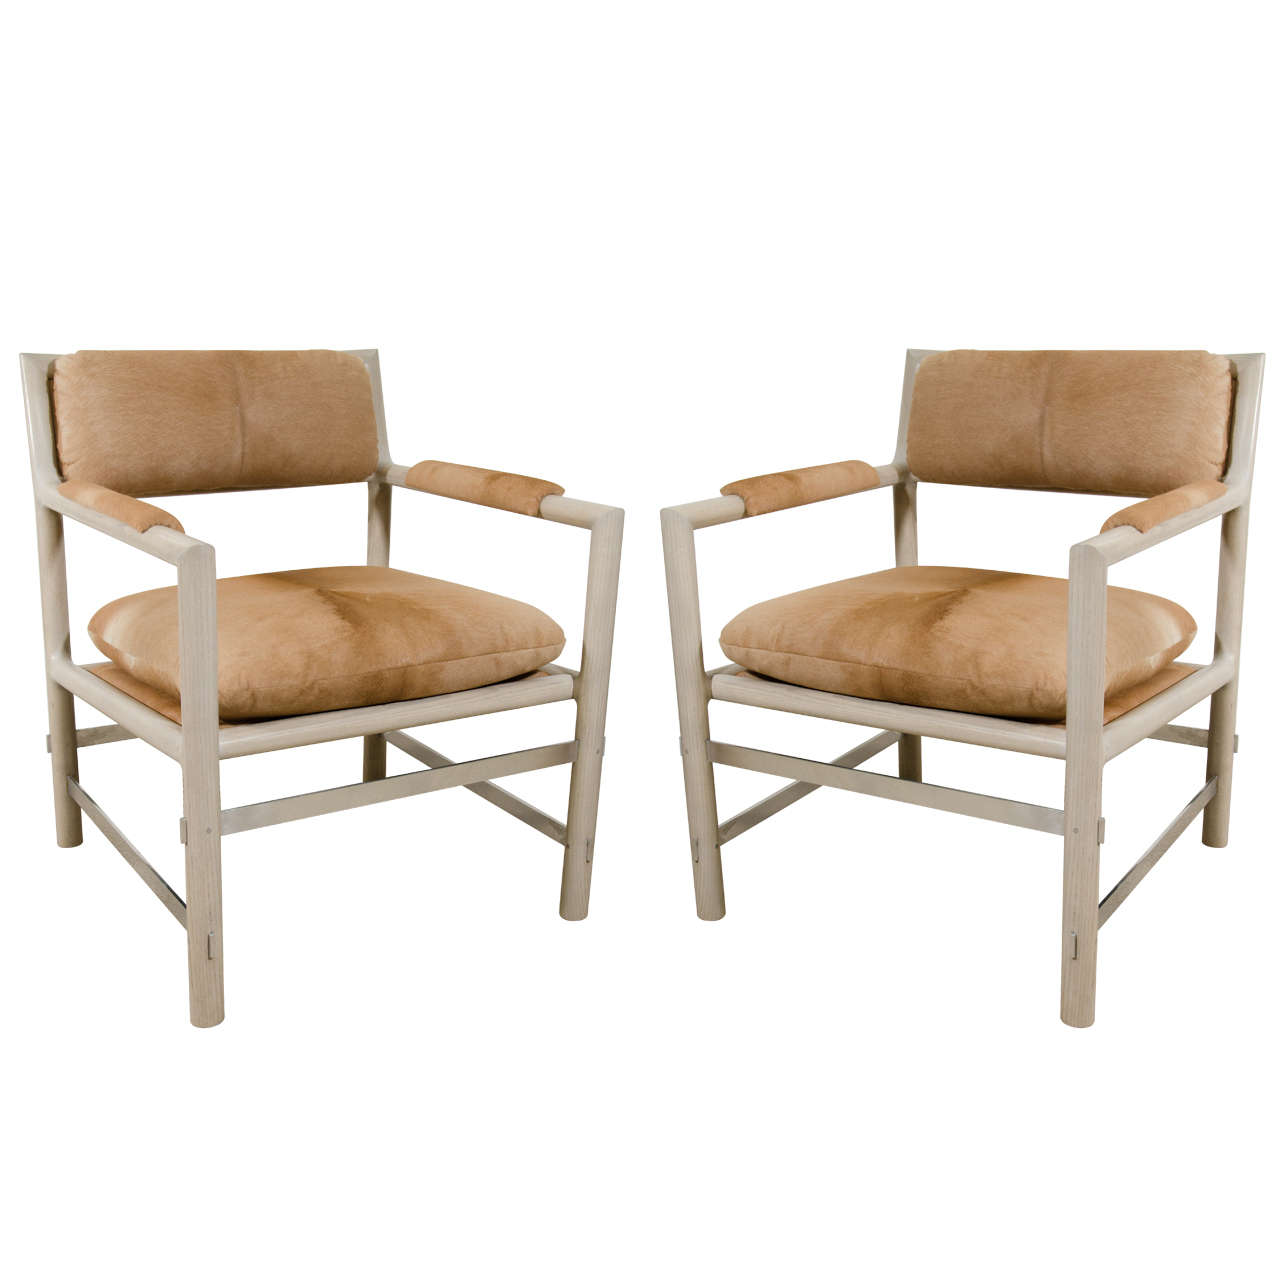 Pair of Edward Wormley for Dunbar Chairs in Cowhide, circa 1960, USA For Sale